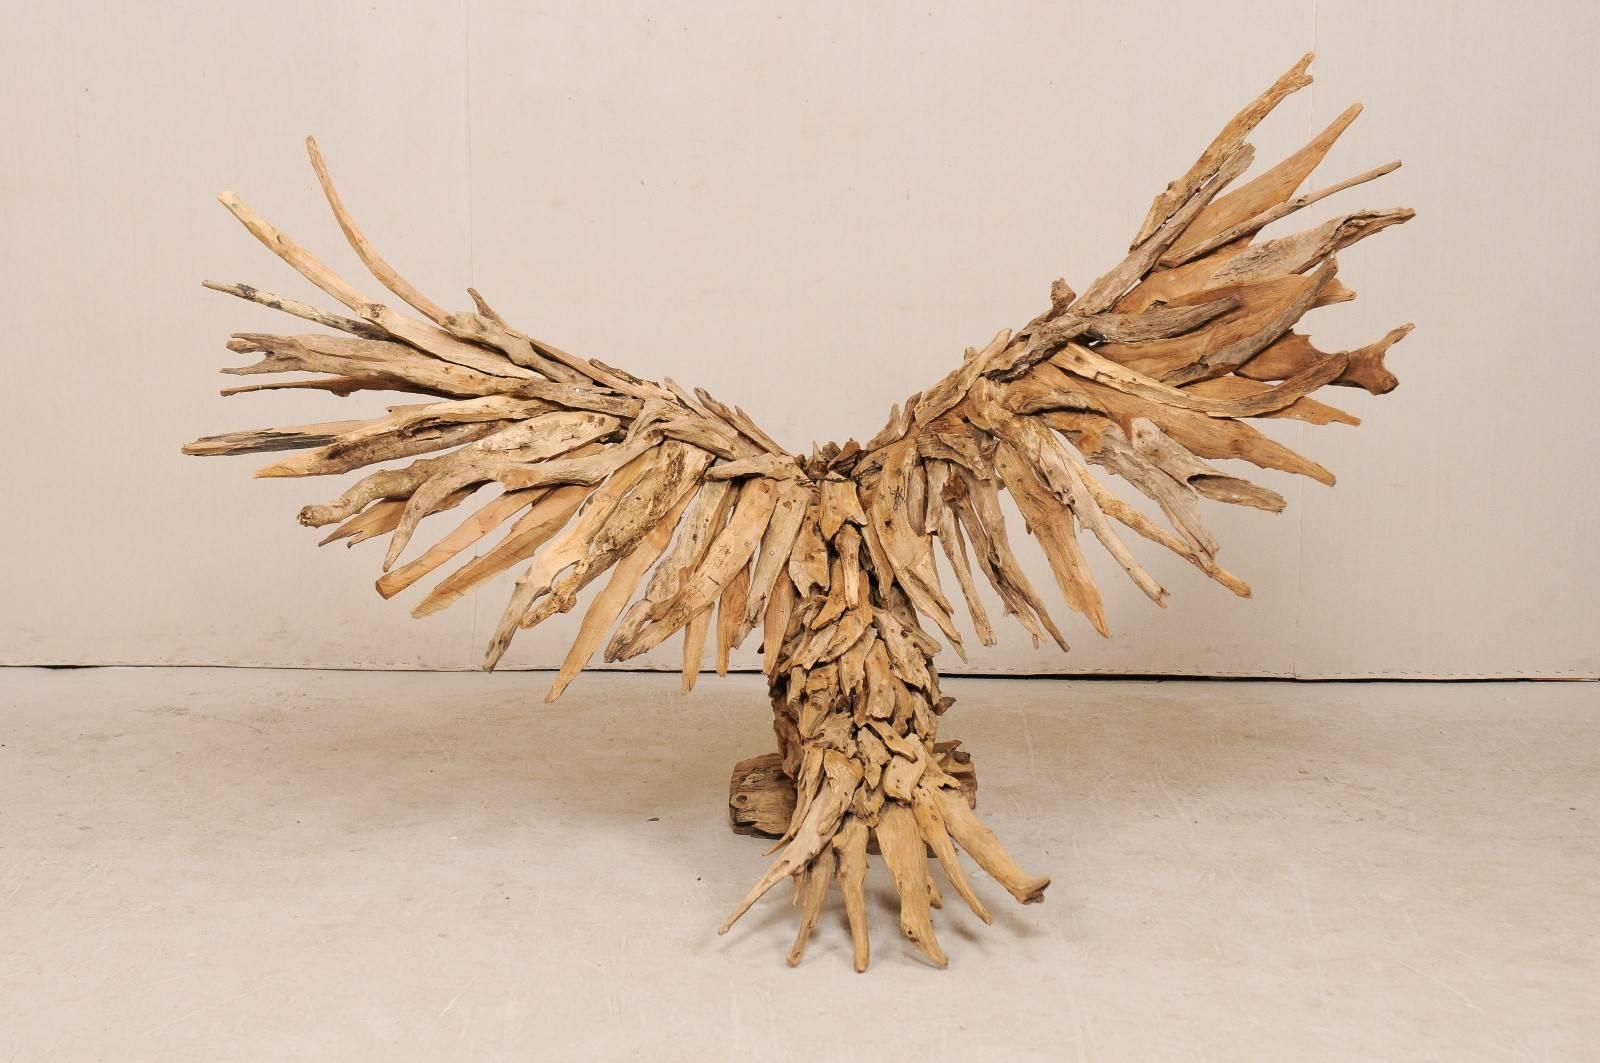 Wood  Eagle Sculpture Artisan-Crafted from Driftwood, 4.5 Ft Tall w/ 6+ Ft Wing-Span For Sale